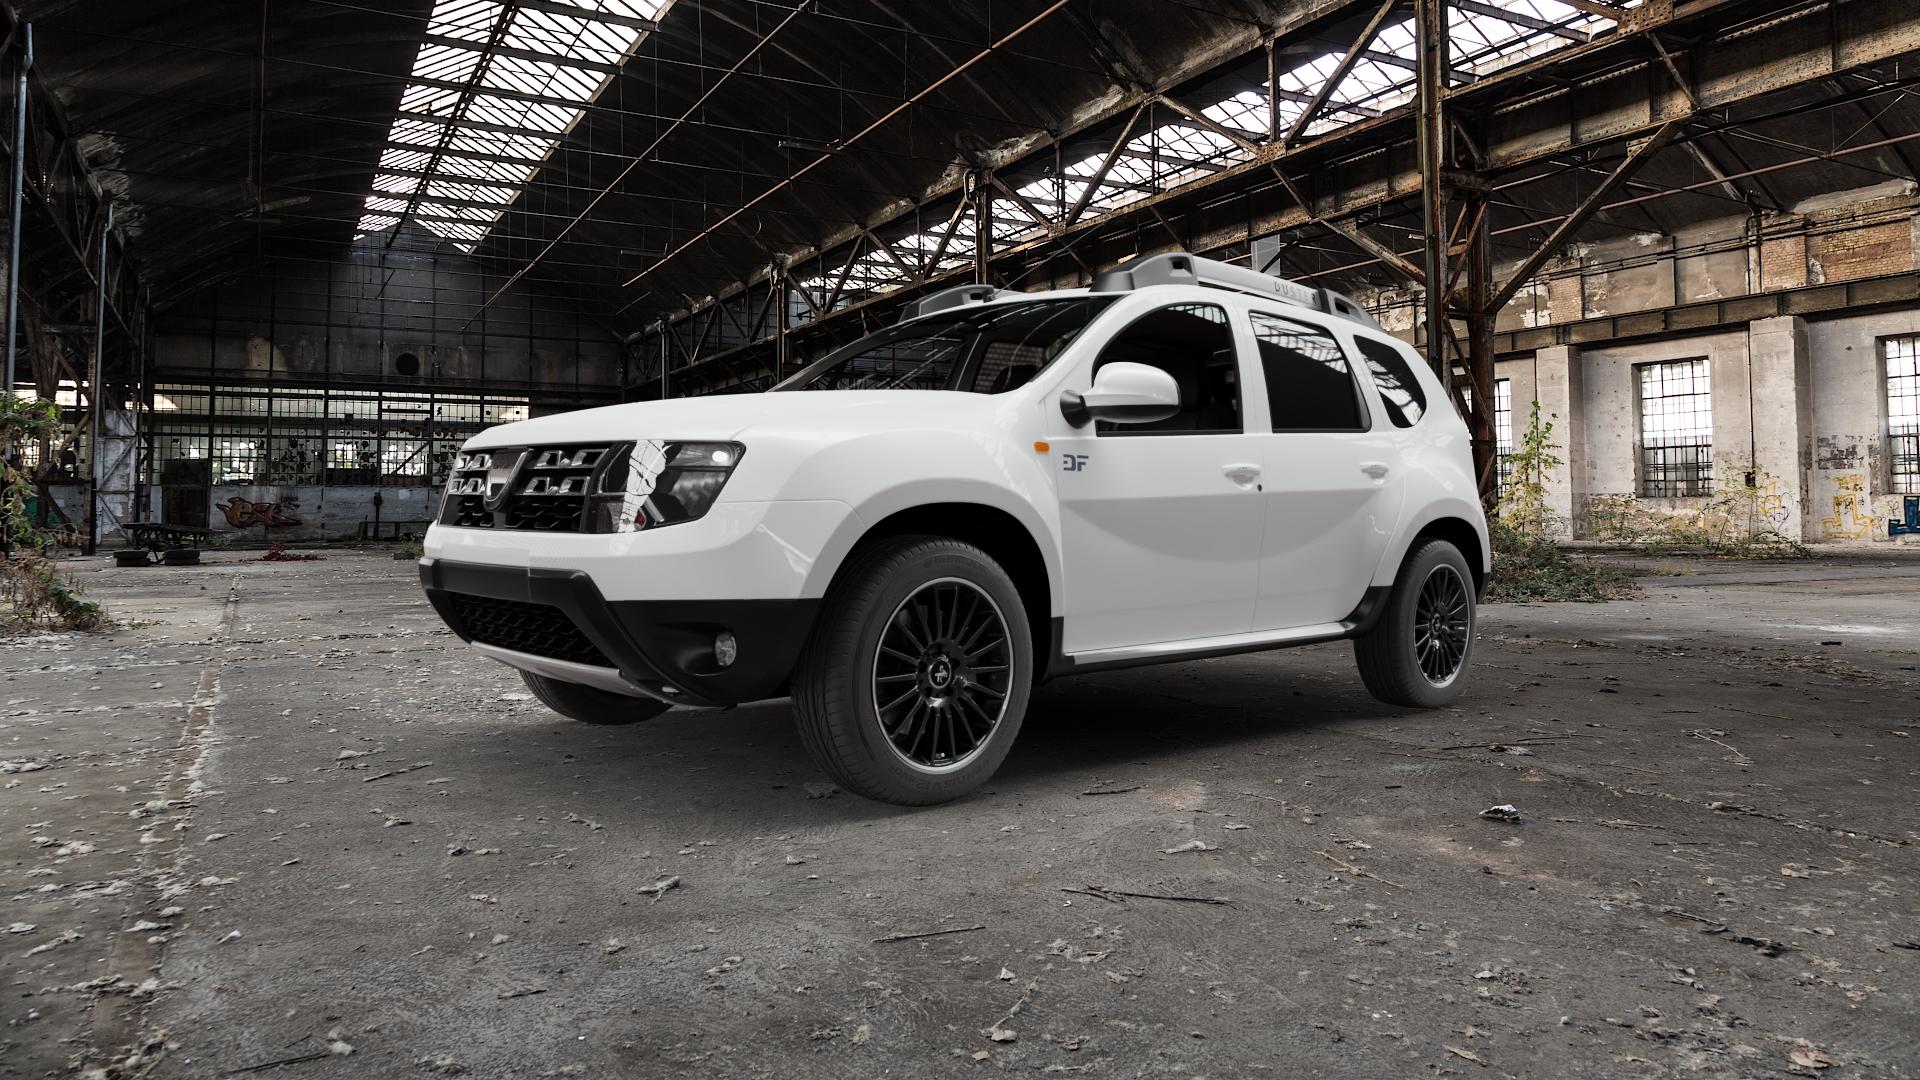 Dacia Duster Type SD 1,5l dCi 80kW (109 hp) Wheels and Tyre Packages